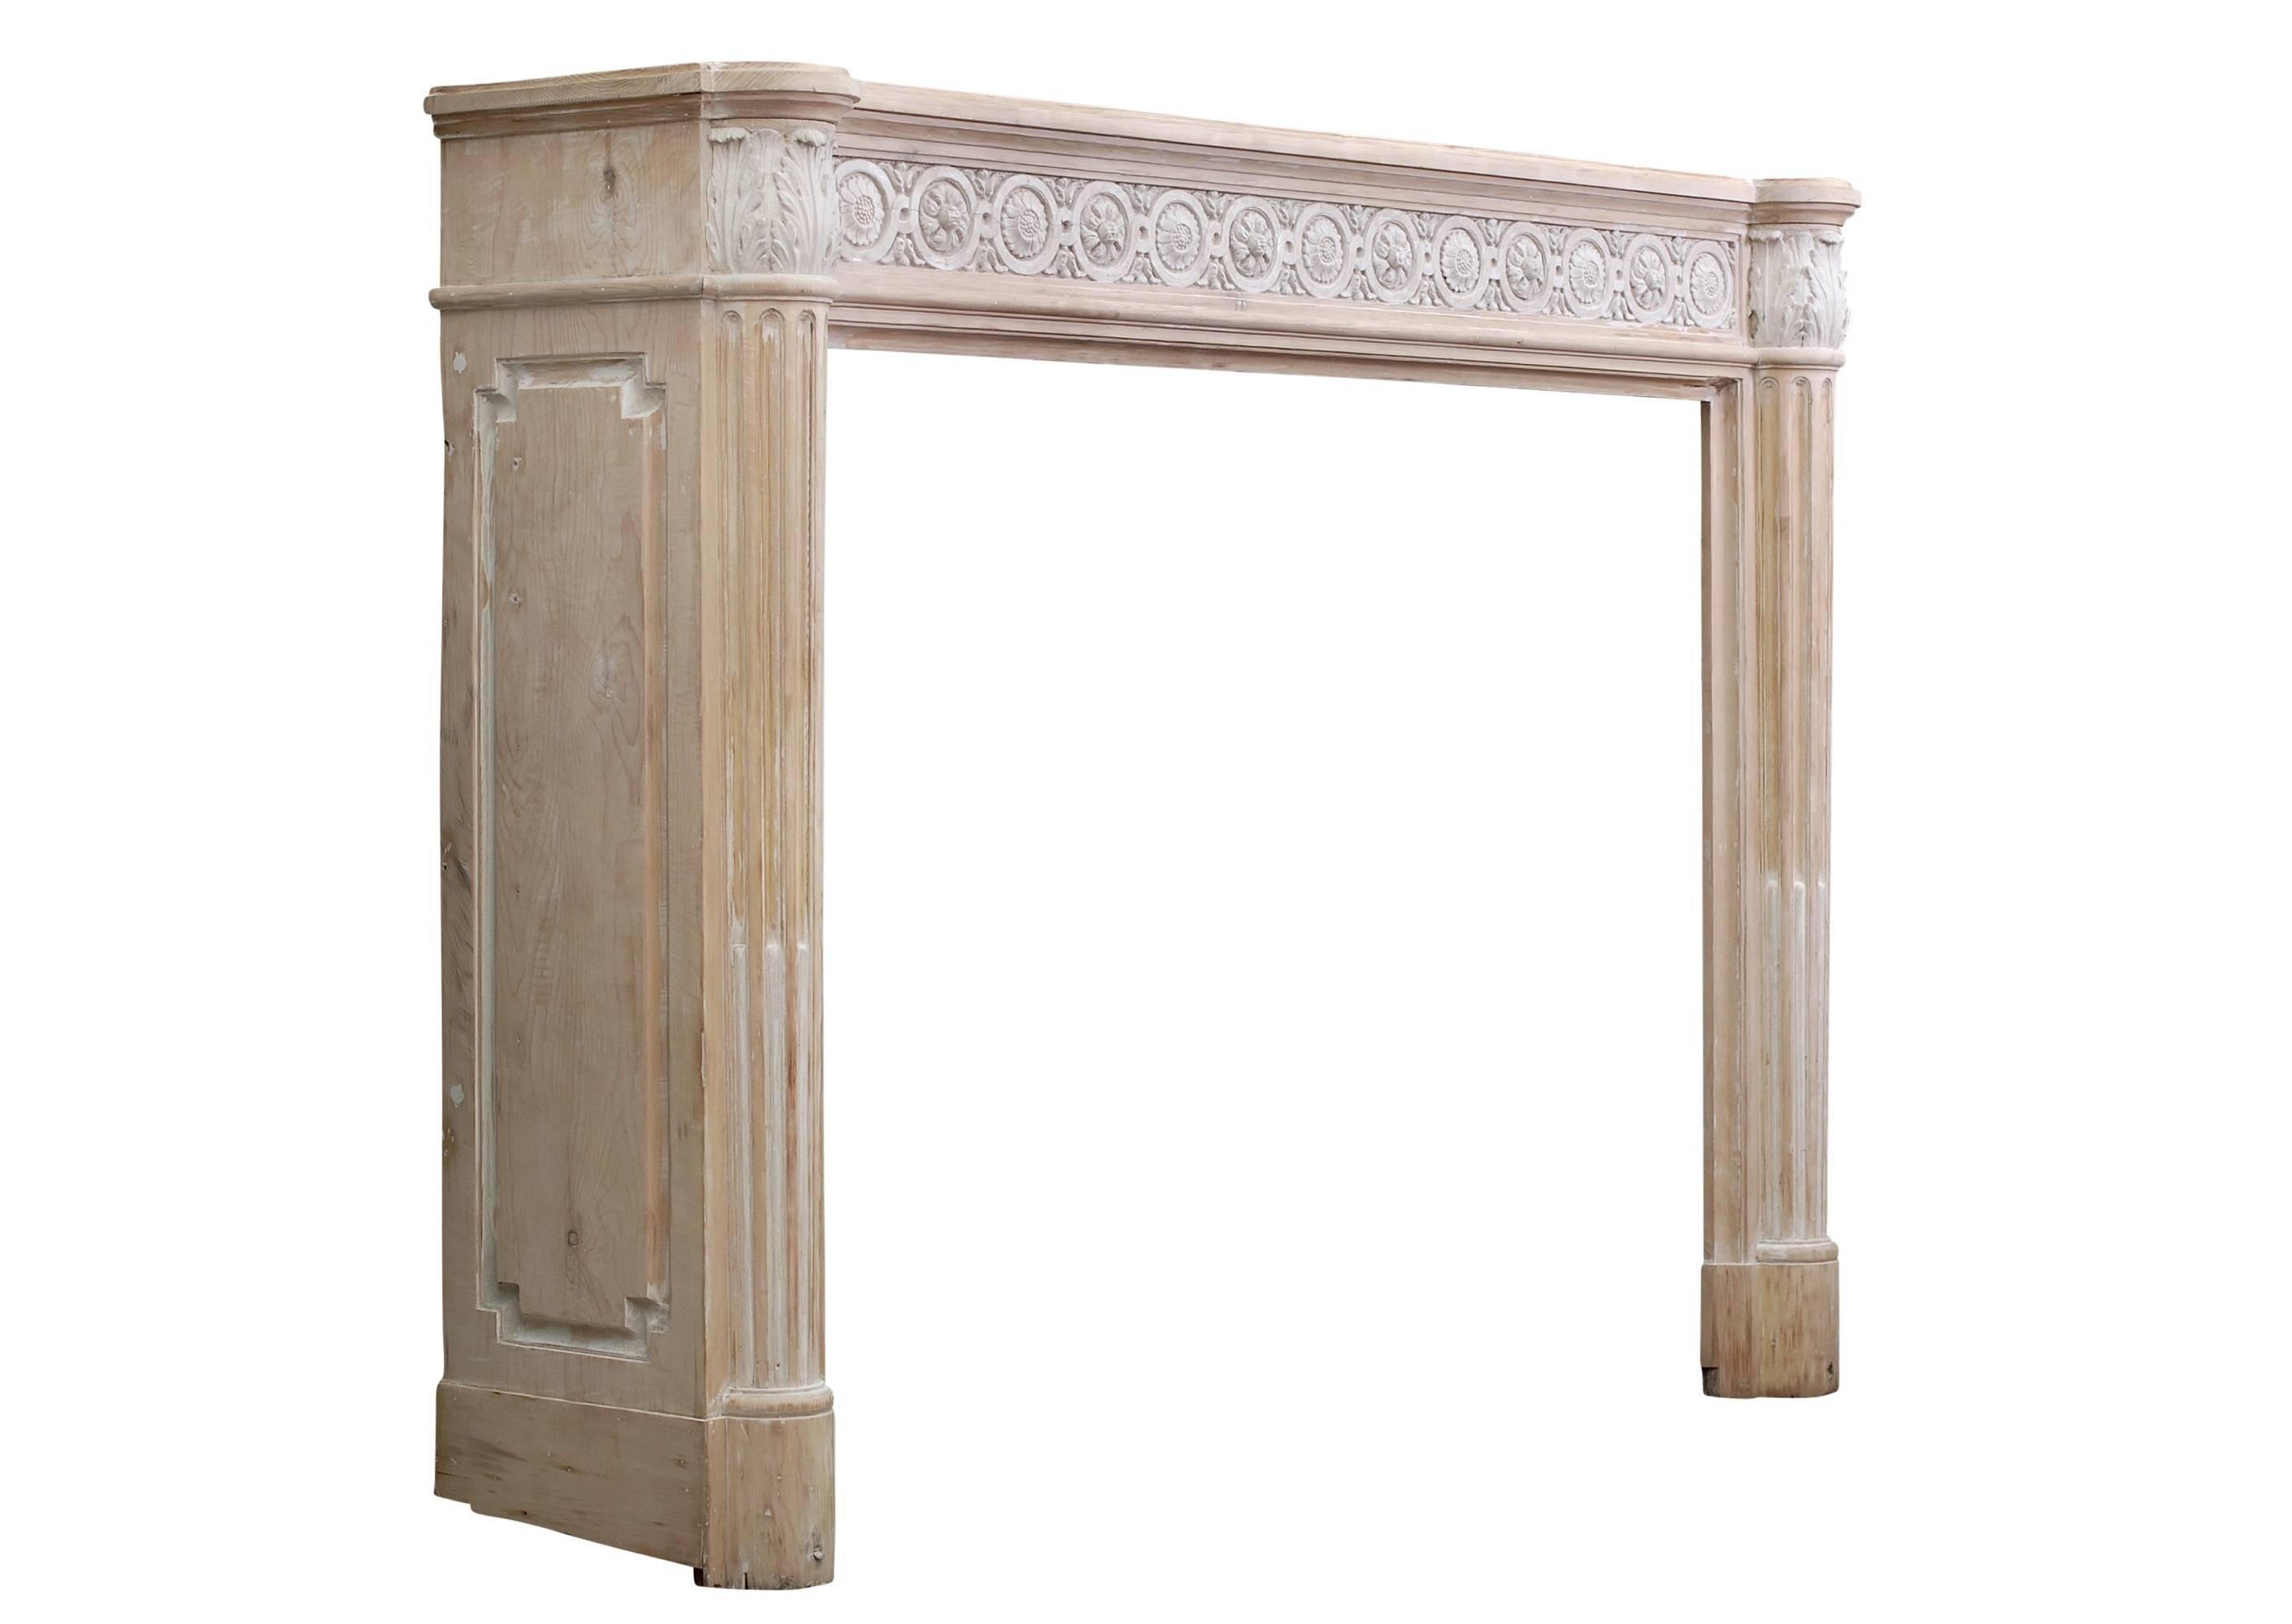 A French Louis XVI style wood fireplace with composition enrichments. The stop-fluted jambs with tapering, half rounded columns, surmounted by finely carved acanthus leaf capitals. The frieze with guilloche composition throughout. Moulded, shaped